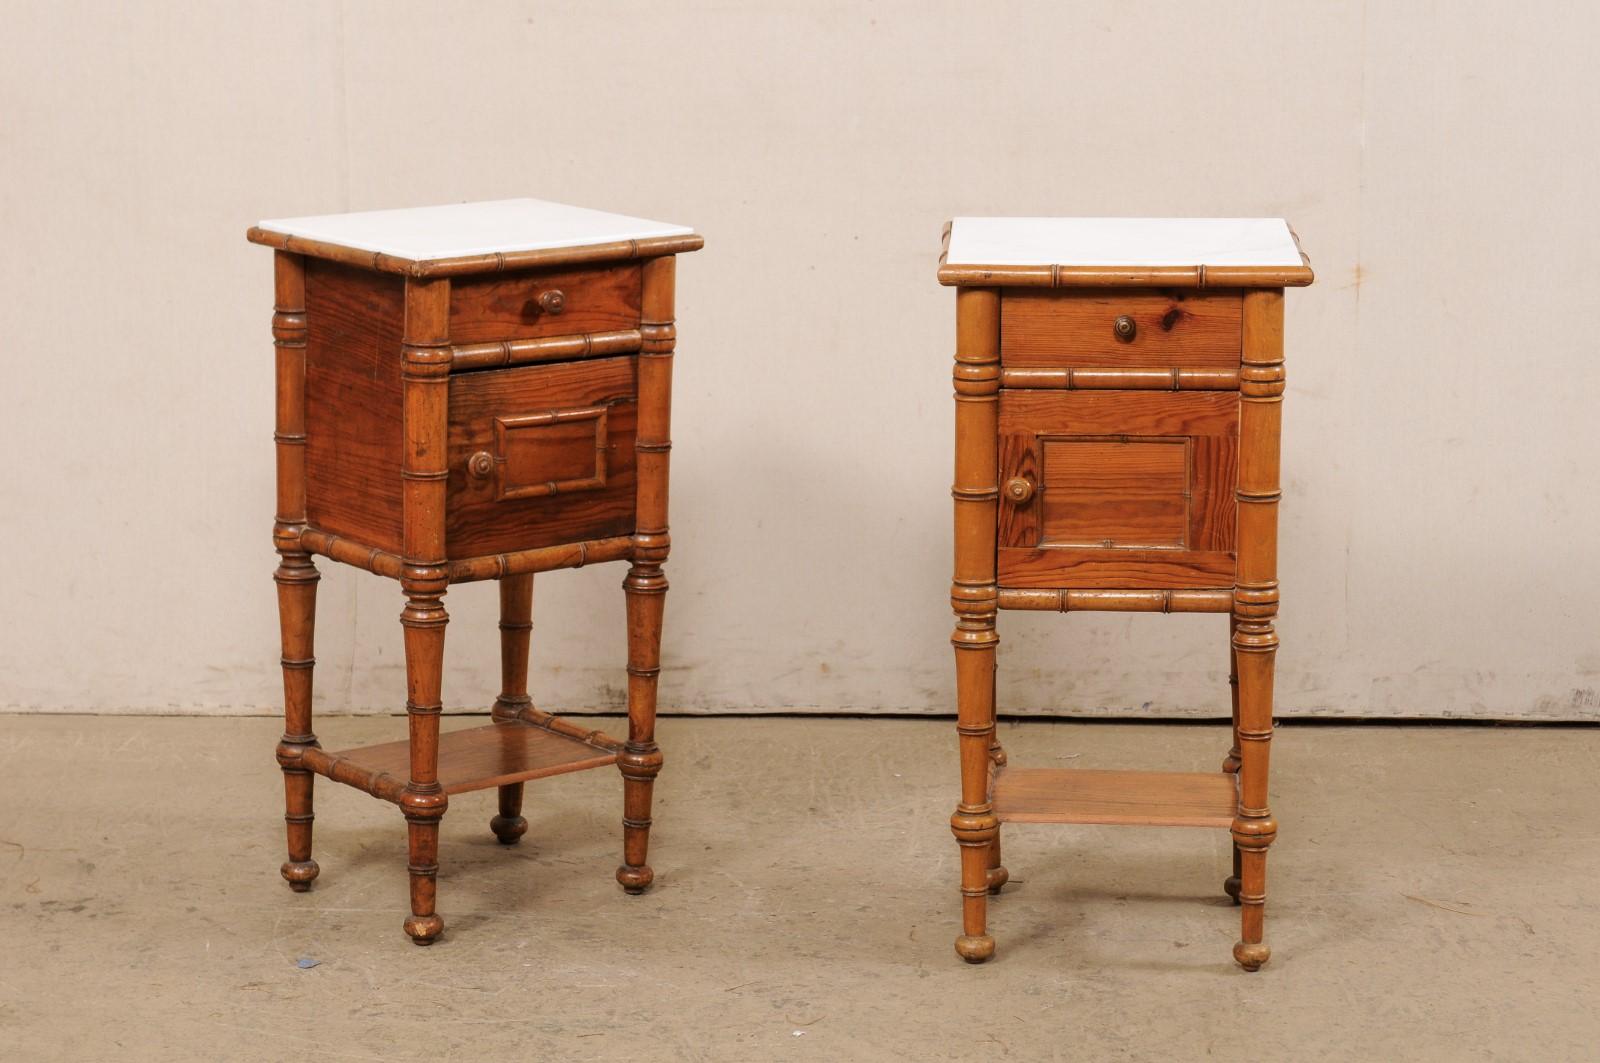 An English pair of side chests, with lower shelf and marble tops, from the early 20th century. These antique side chests from England are each topped with white marble slabs, resting atop a case which houses a small drawer over a single recessed